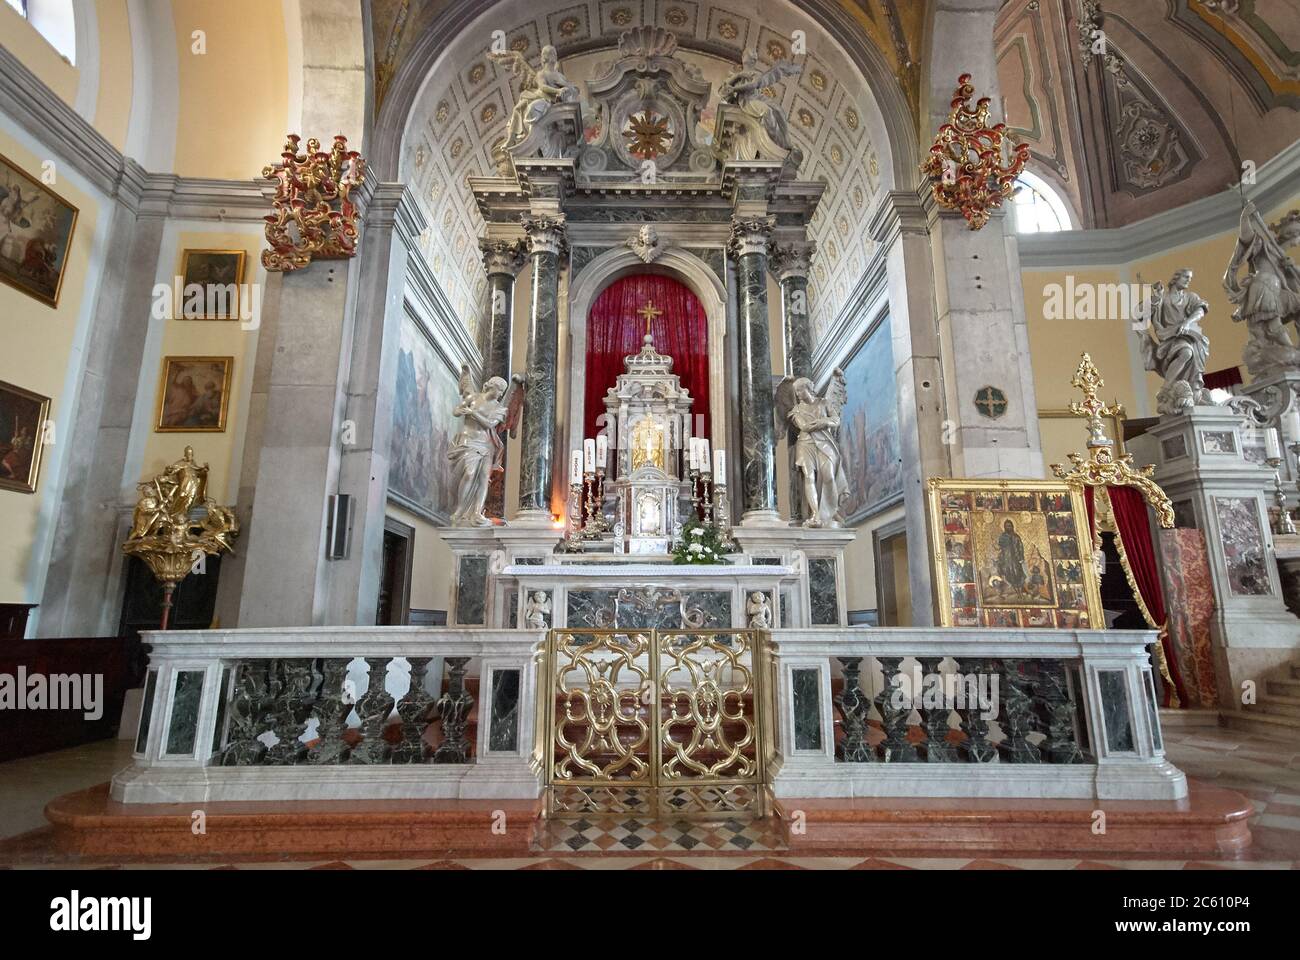 Rovinj, Croatia - August 30, 2007: Interior of the church of St. Euphemia, which is towering at the center of old town of Rovinj and is visible and re Stock Photo